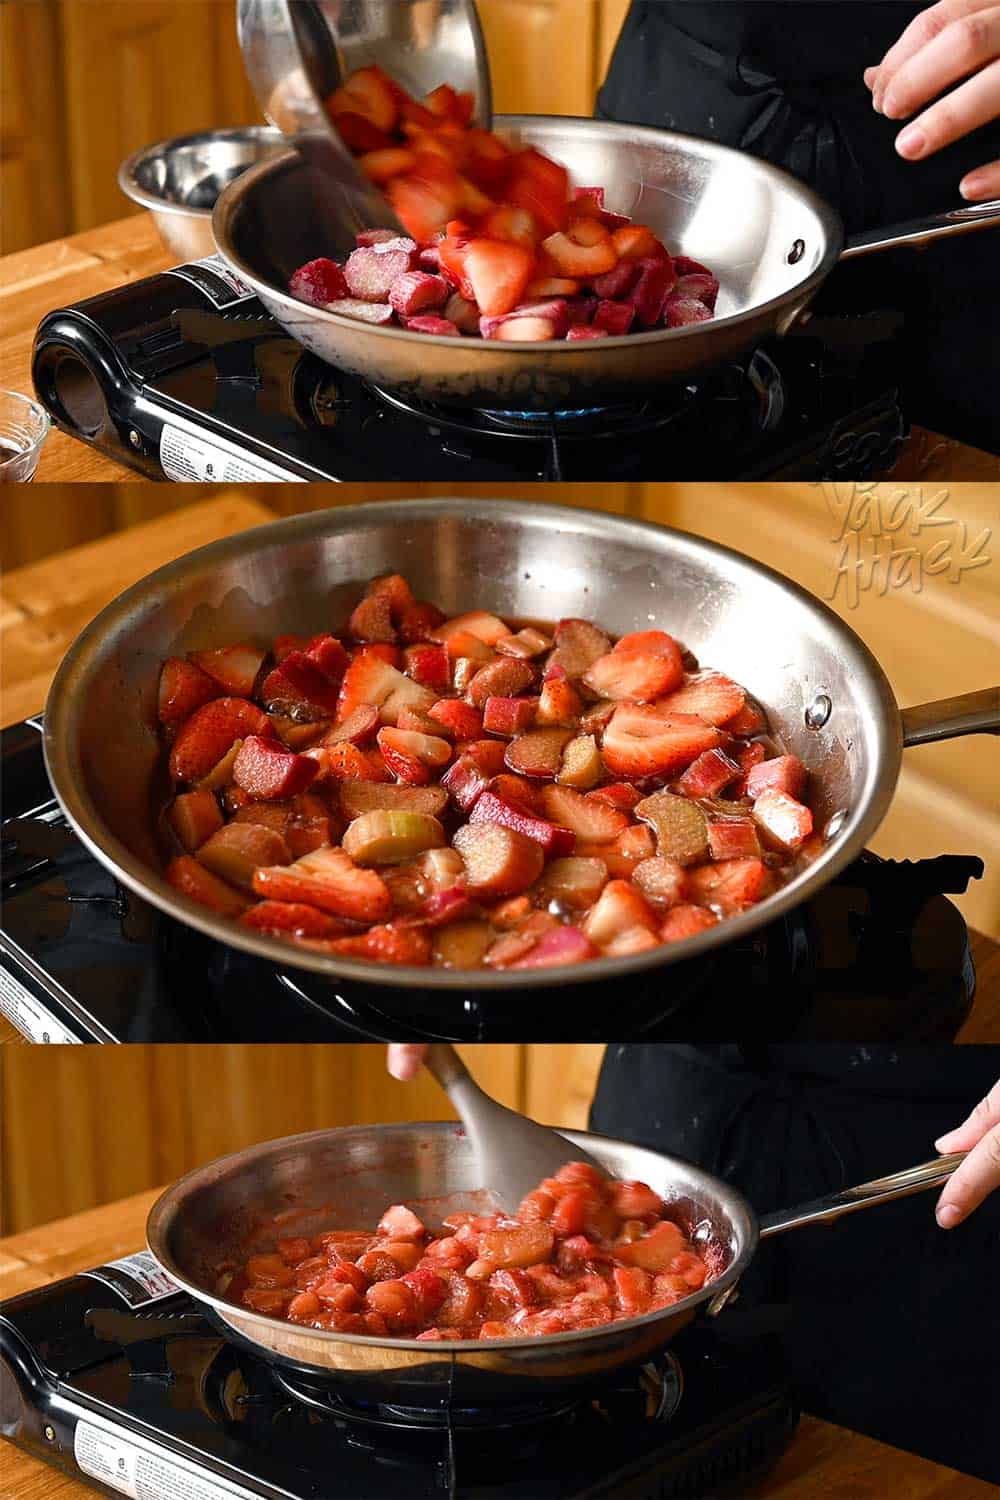 Image collage of strawberries and rhubarb cooking in a pan